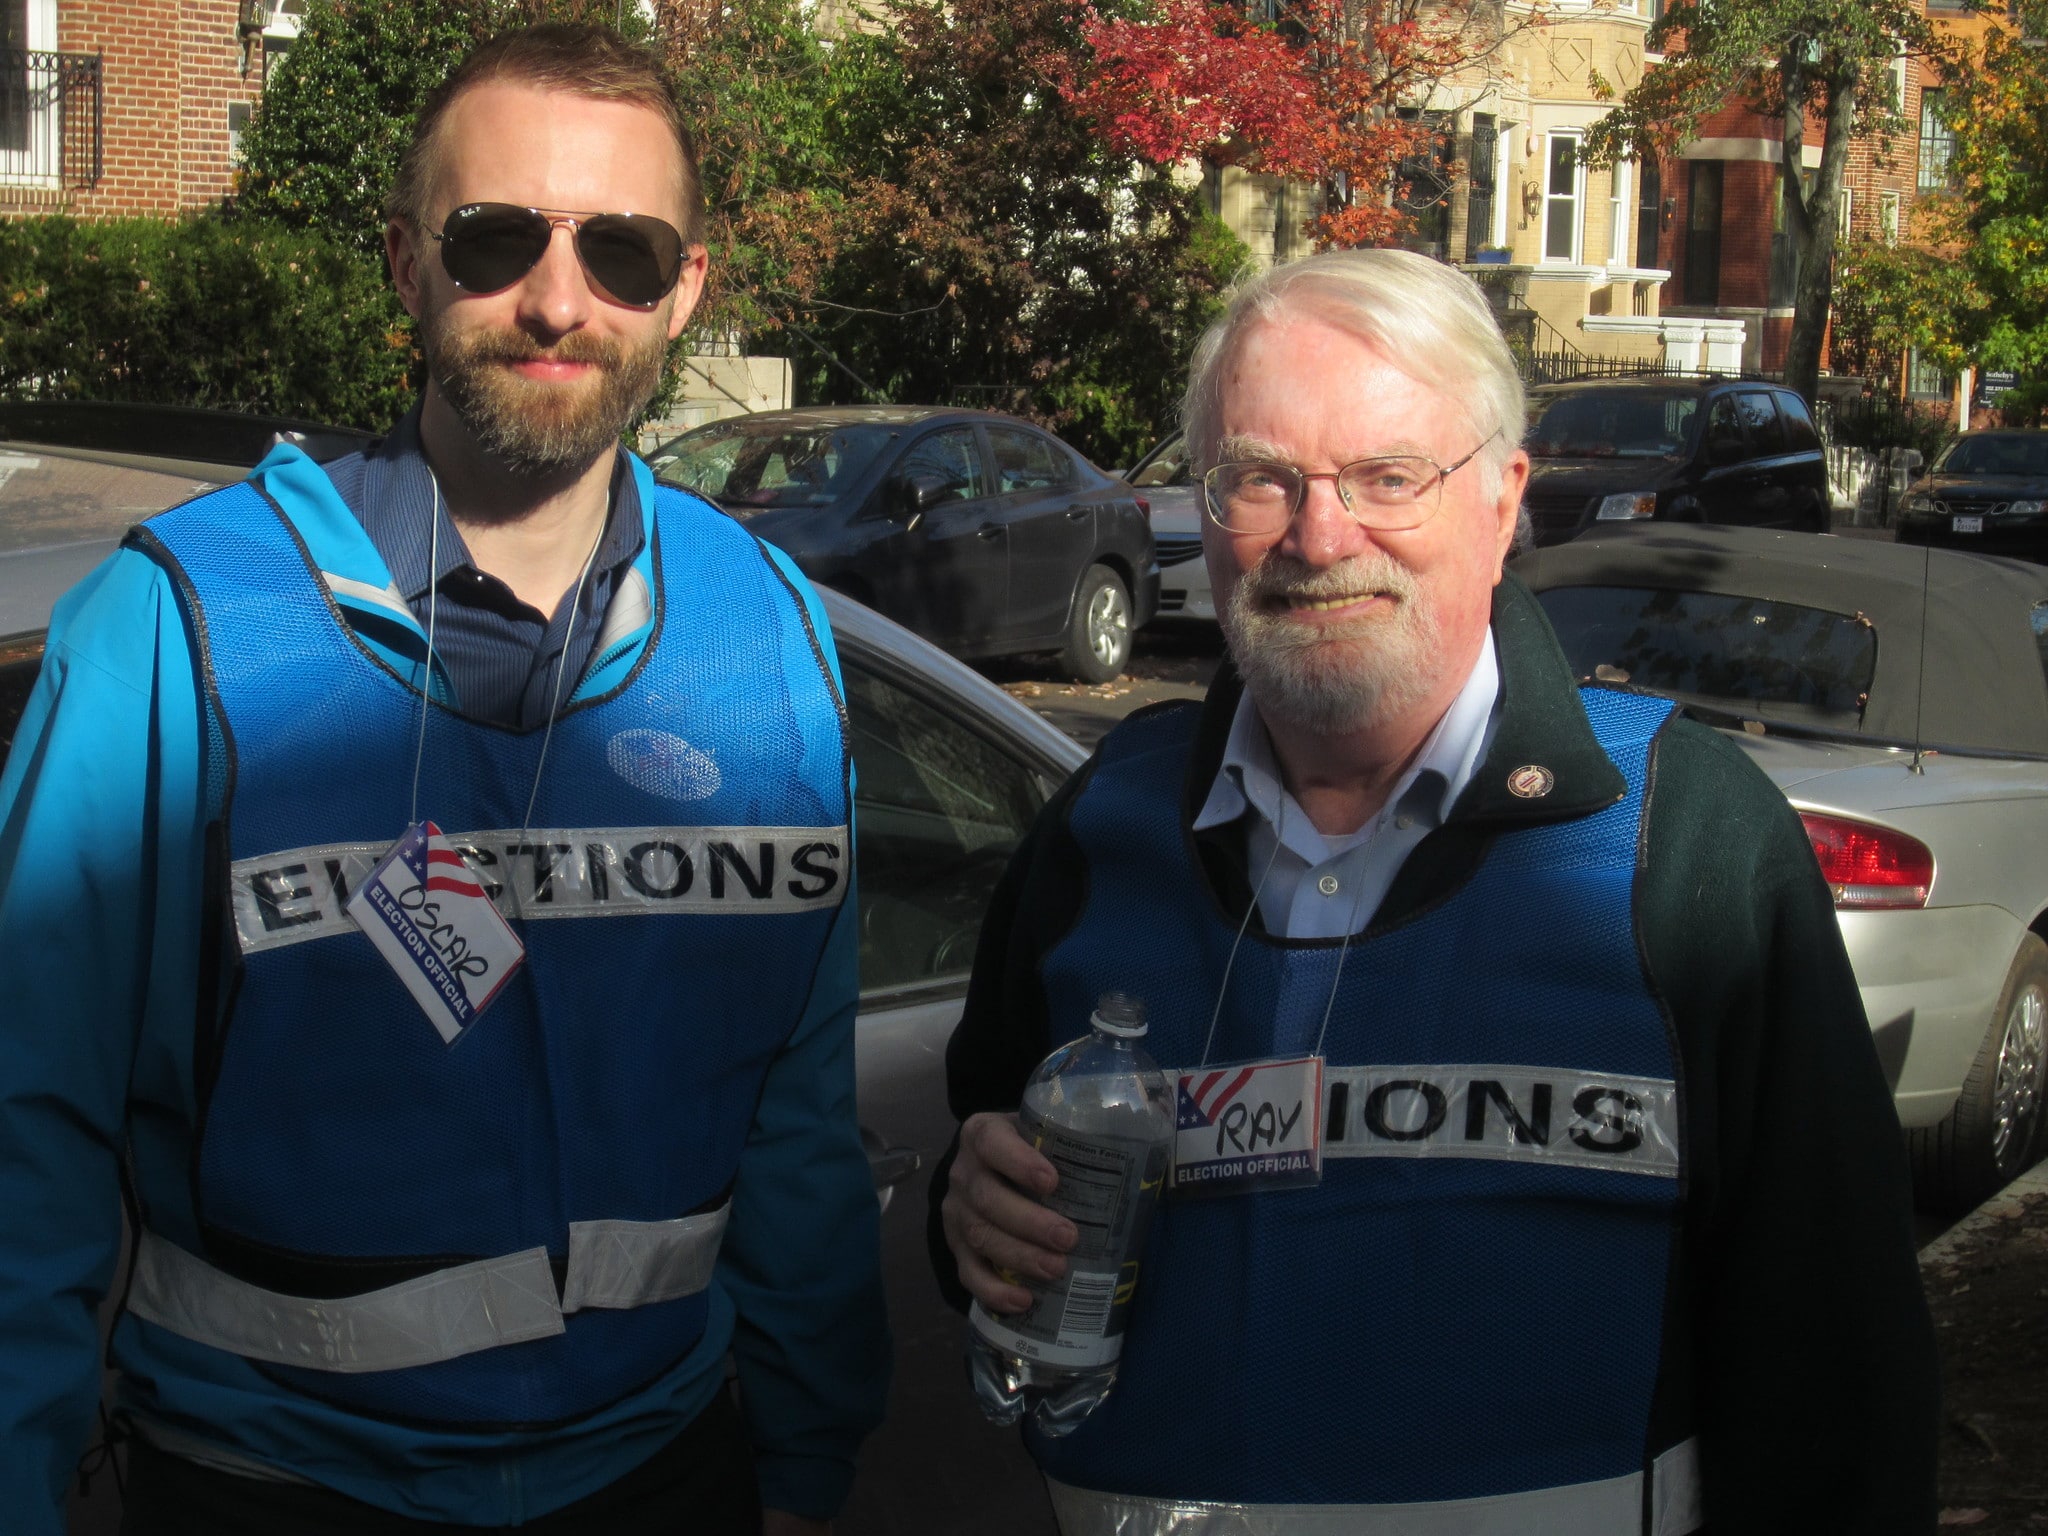 Photo of two men wearing blue vests that say "elections" on them.